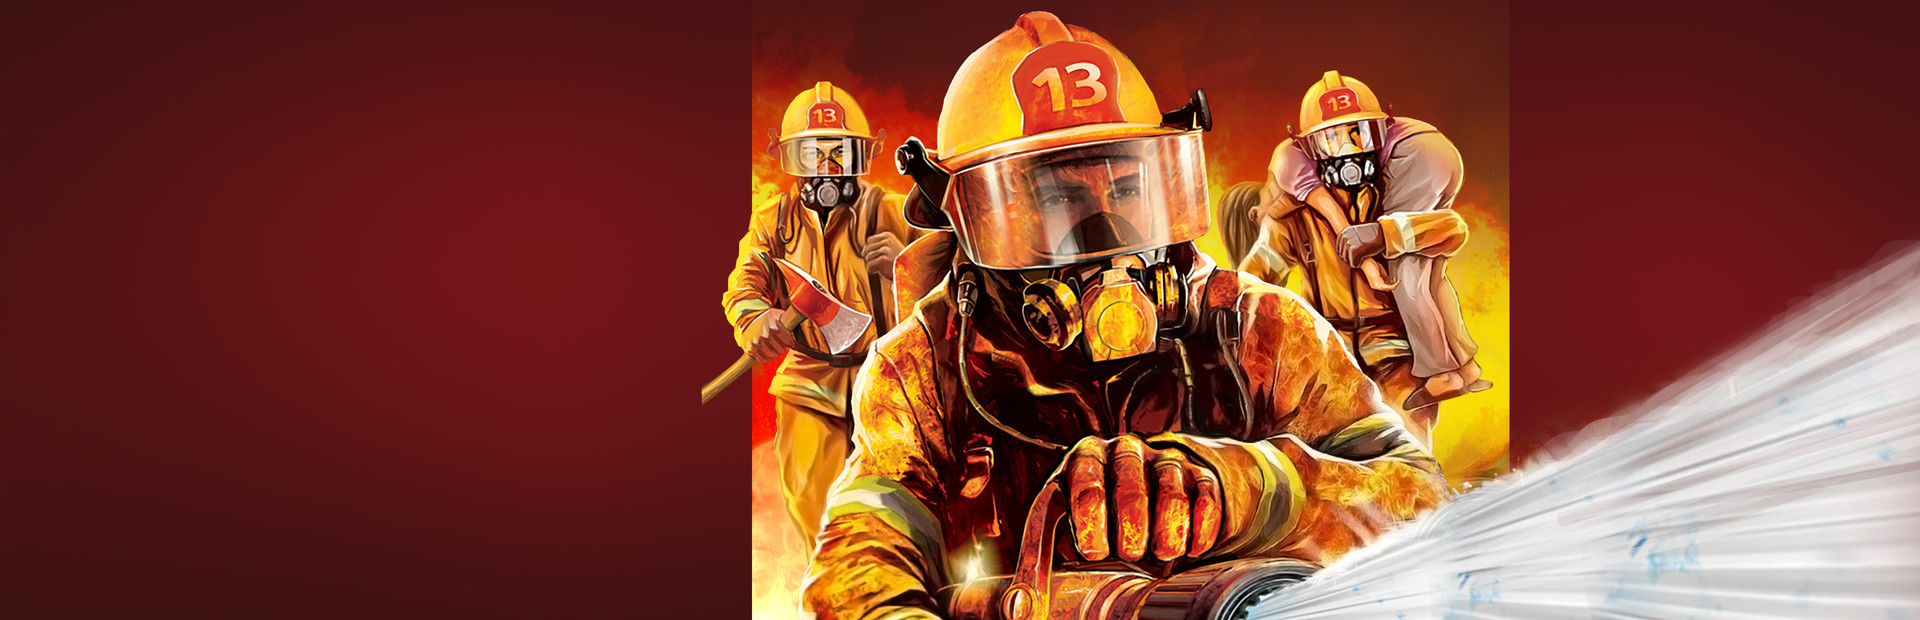 Real Heroes: Firefighter HD cover image